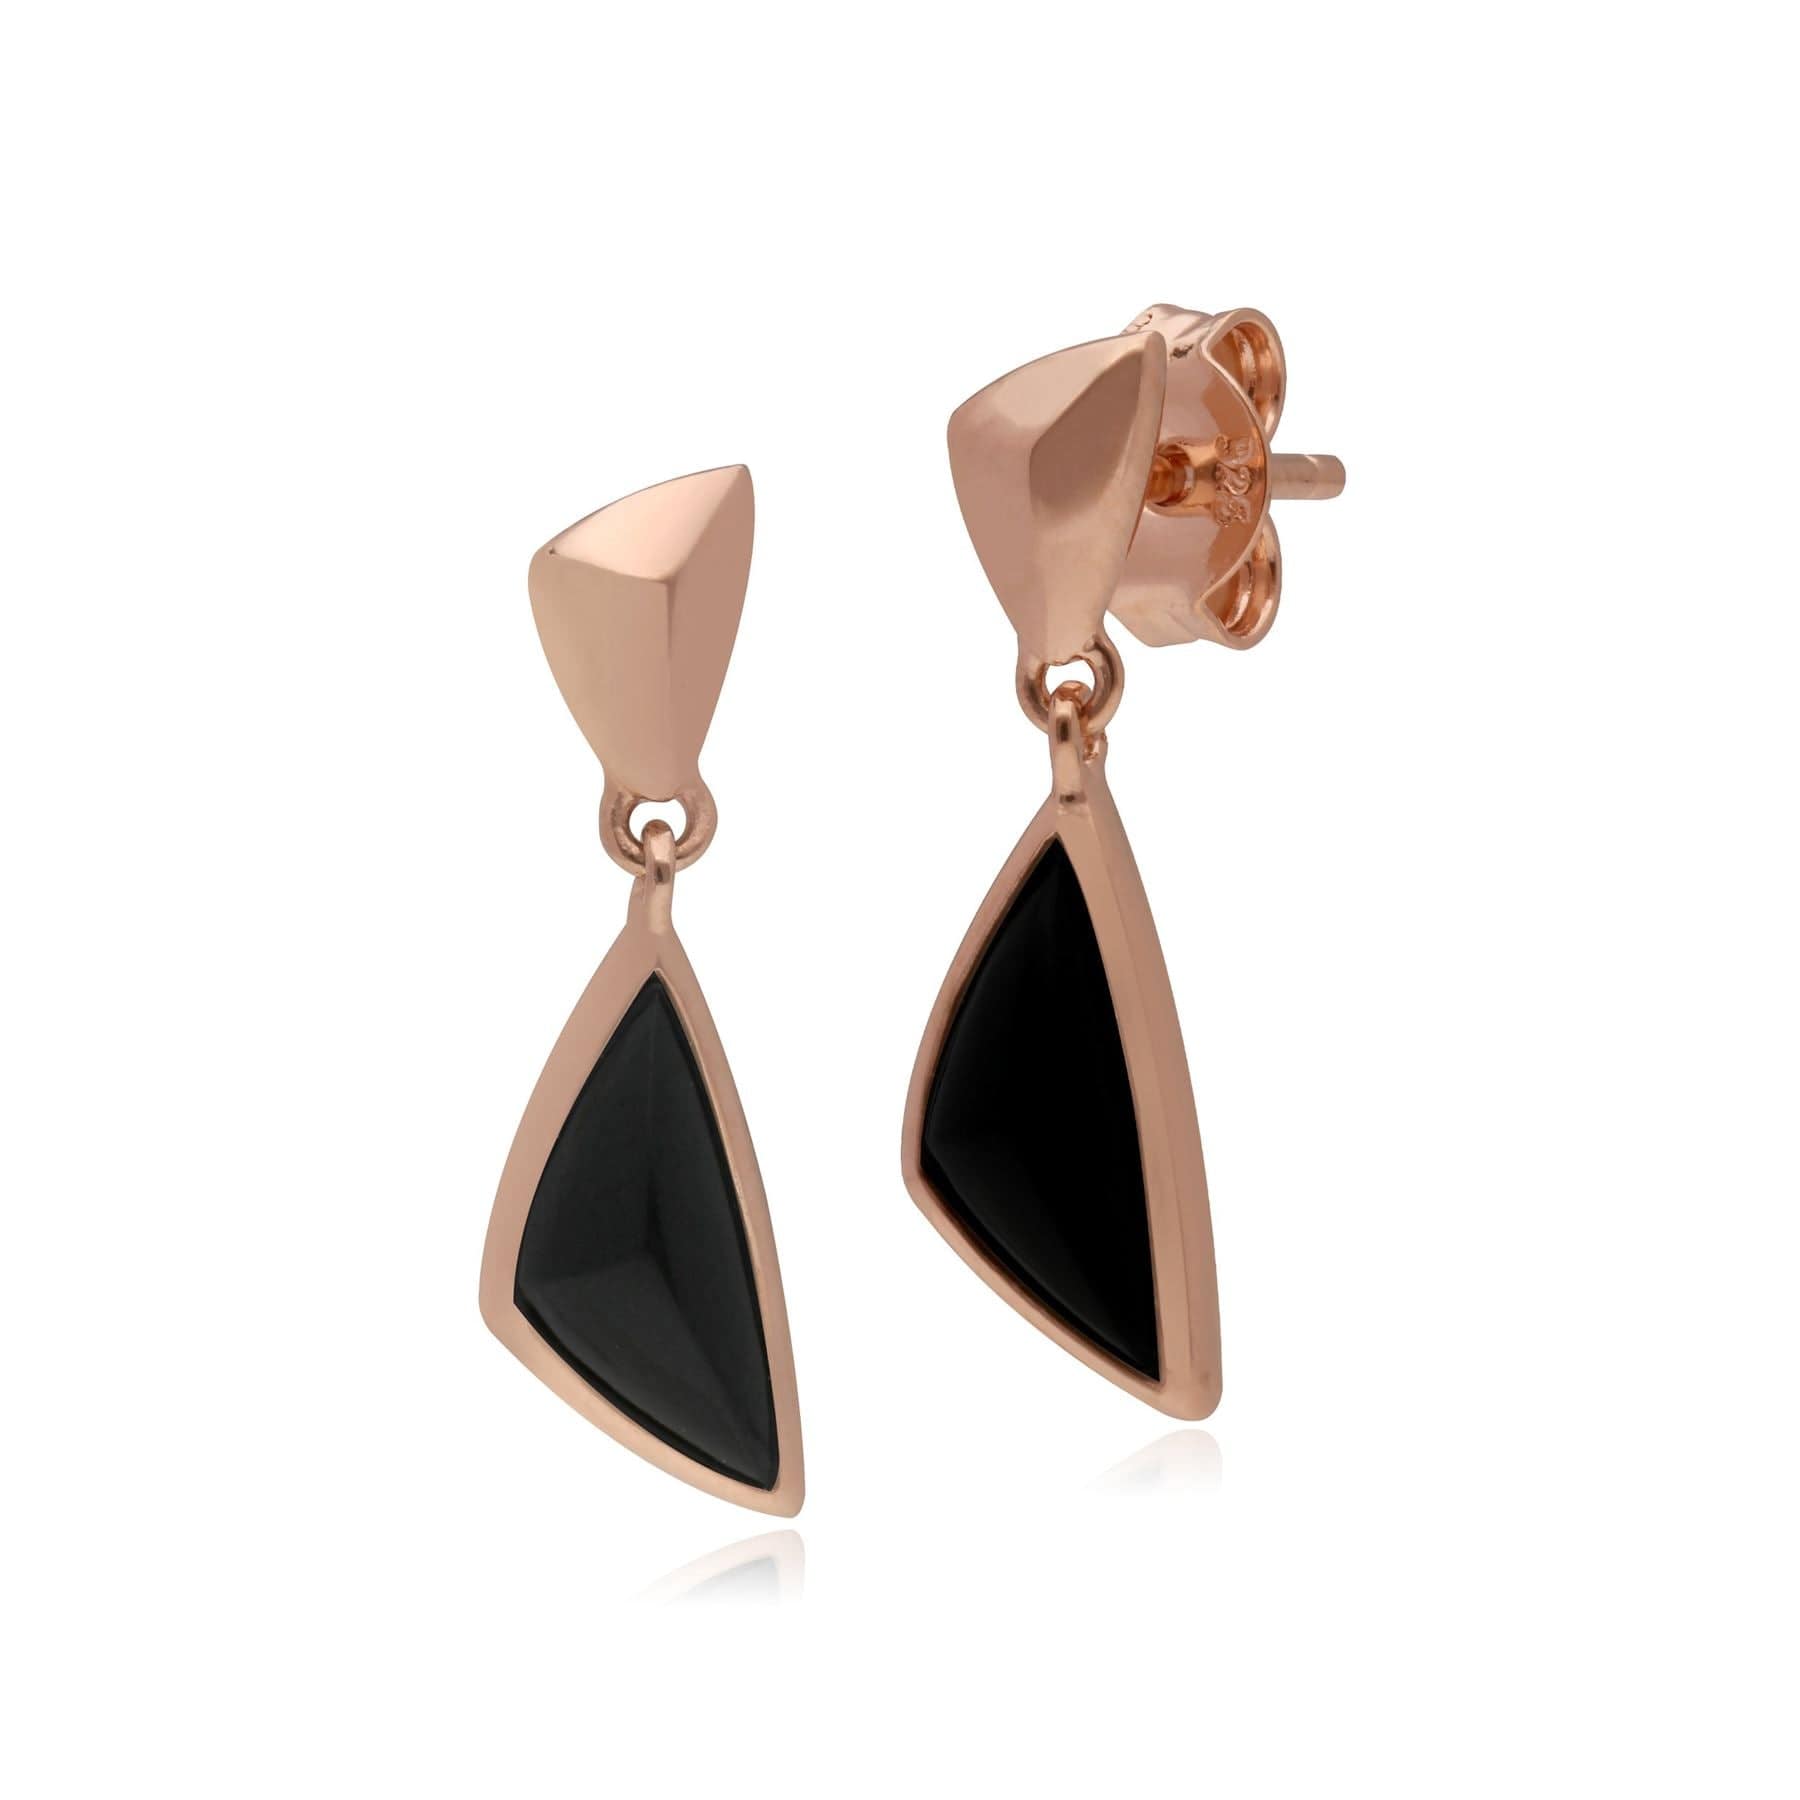 Micro Statement Black Onyx Drop Earrings in Rose Gold Plated 925 Sterling Silver